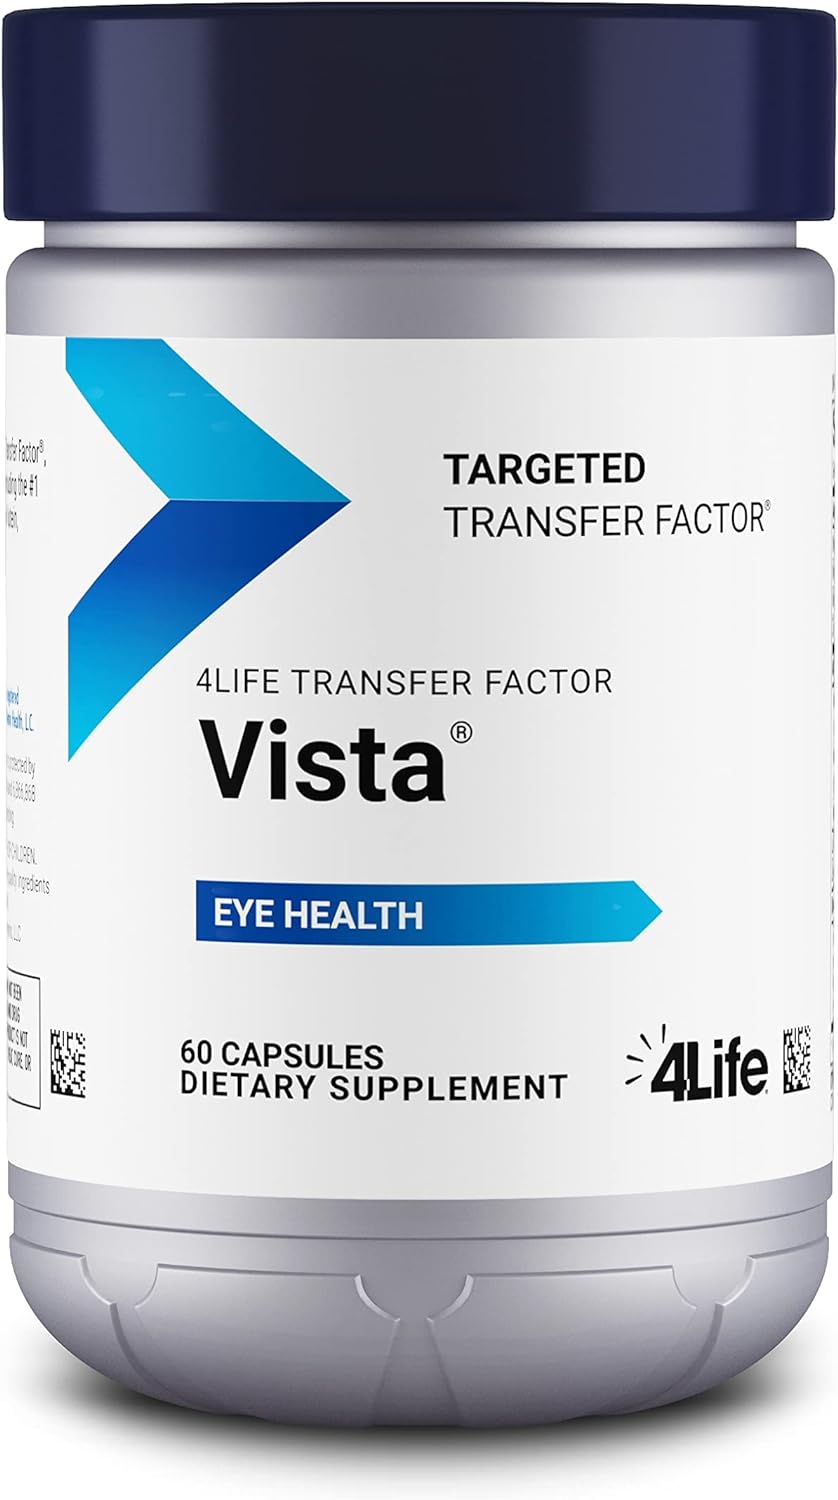 4Life Transfer Factor Vista - Dietary Supplement for Eye Health and Vi